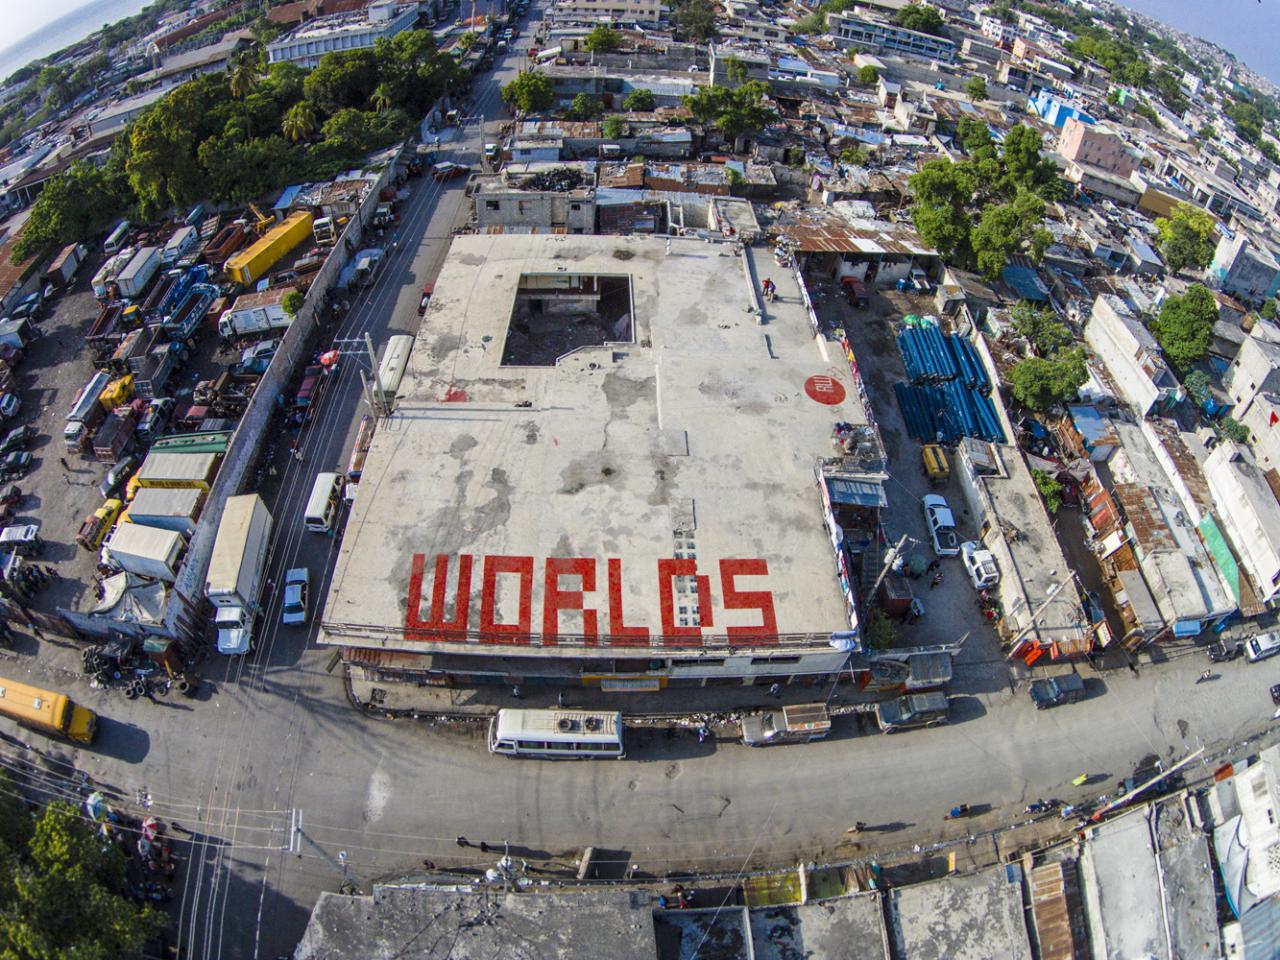 On a roof in red letters: »WORLDS«